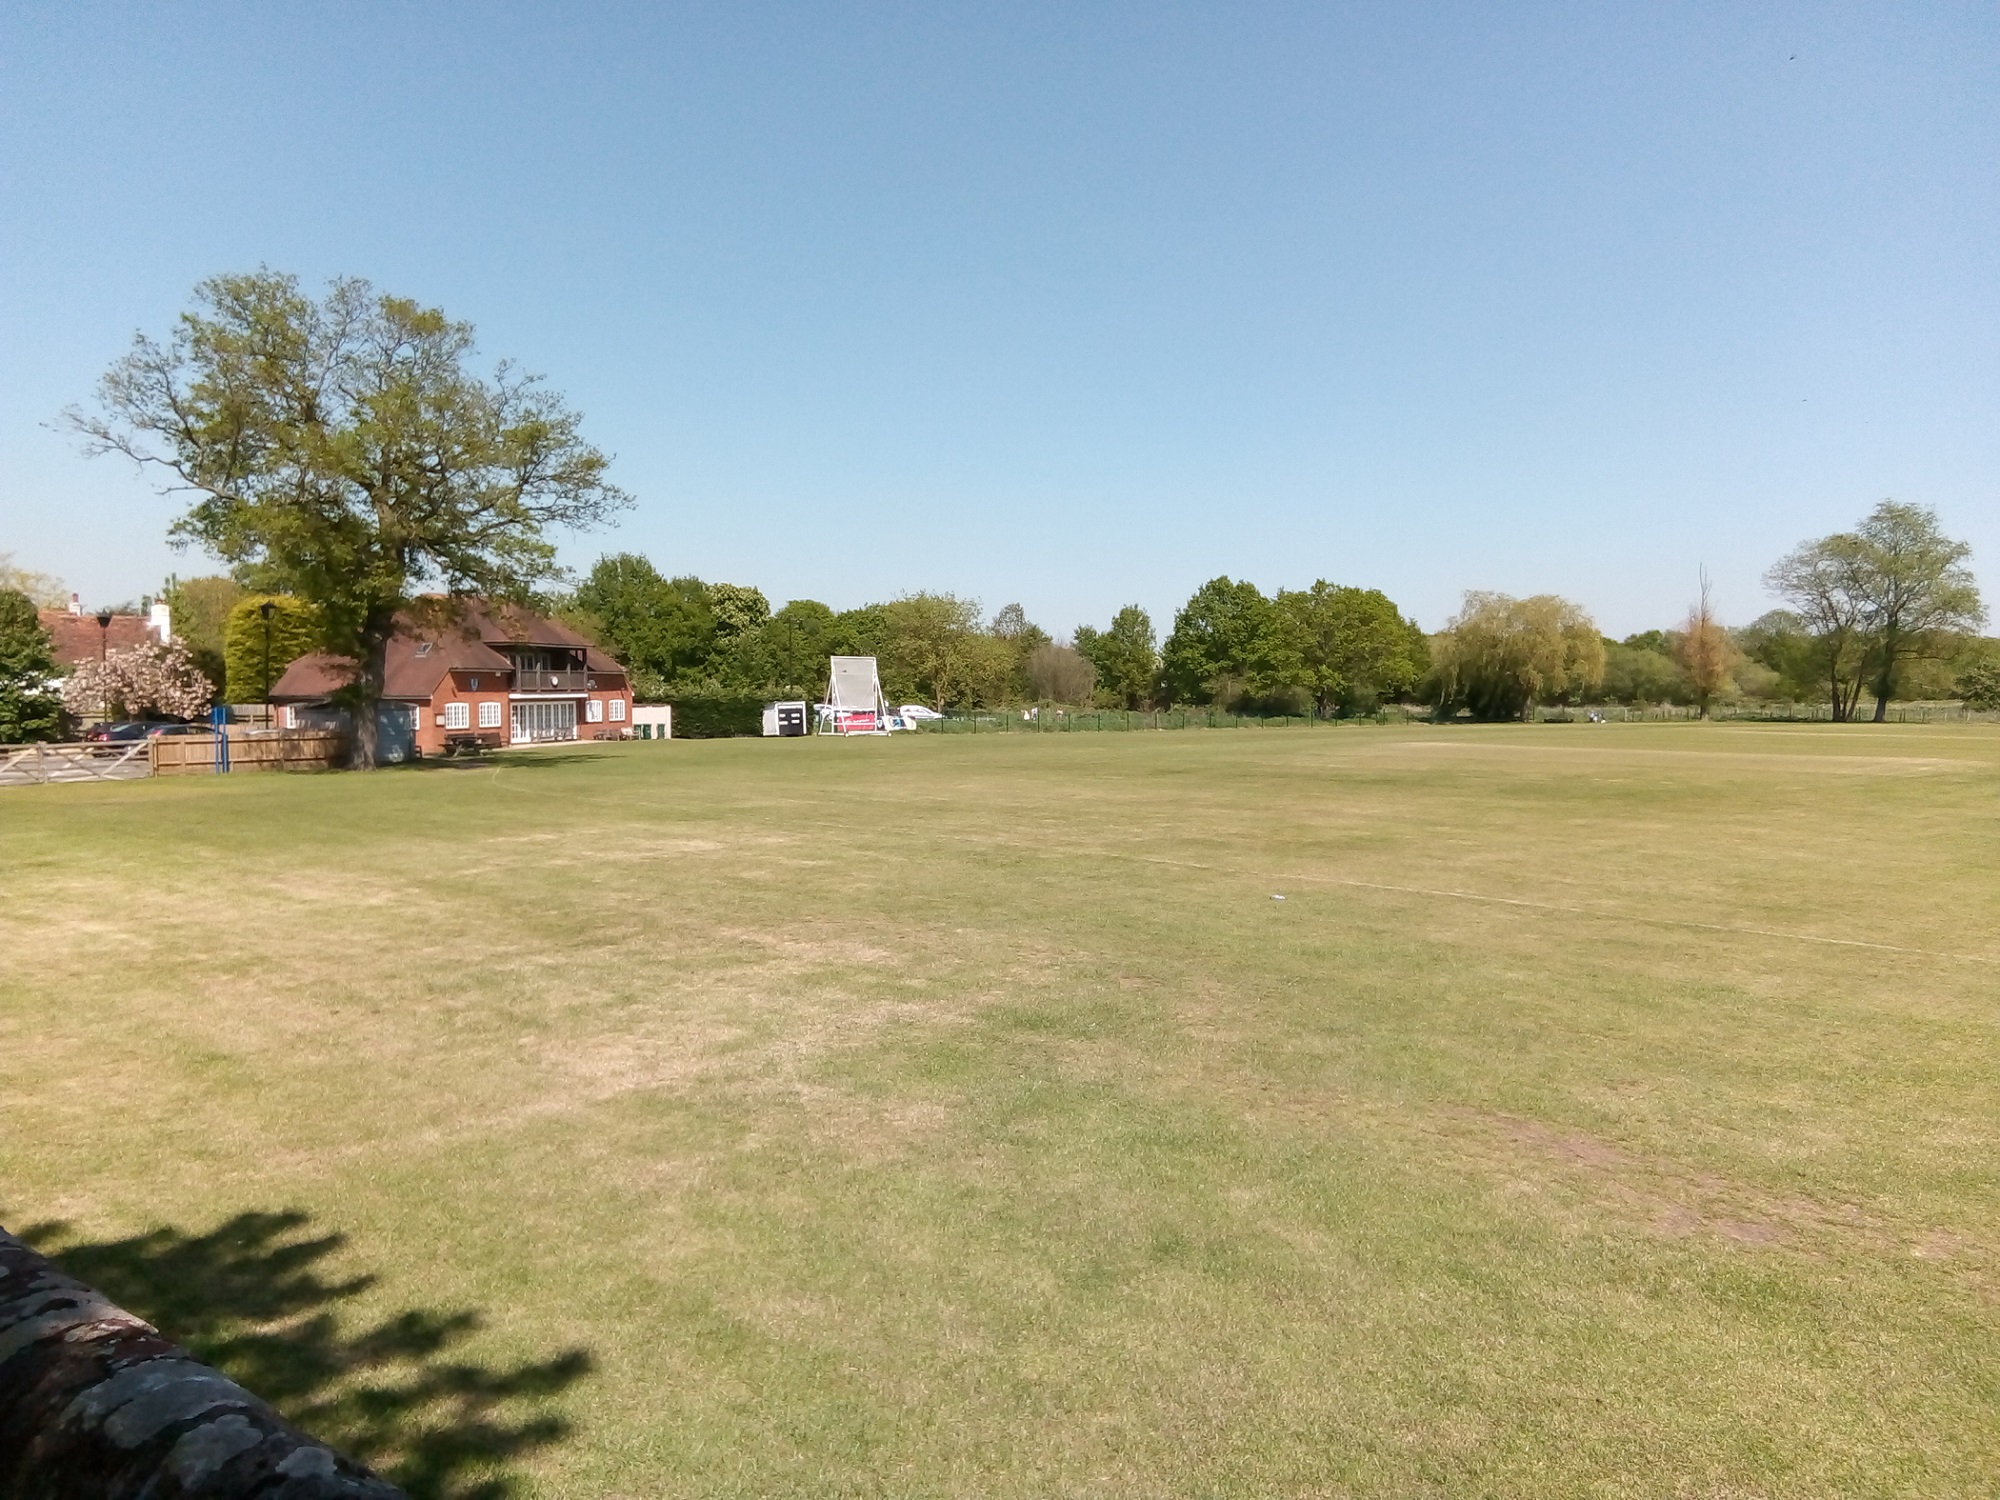 A cricket field and clubhouse in fine sunshine in a rural location.